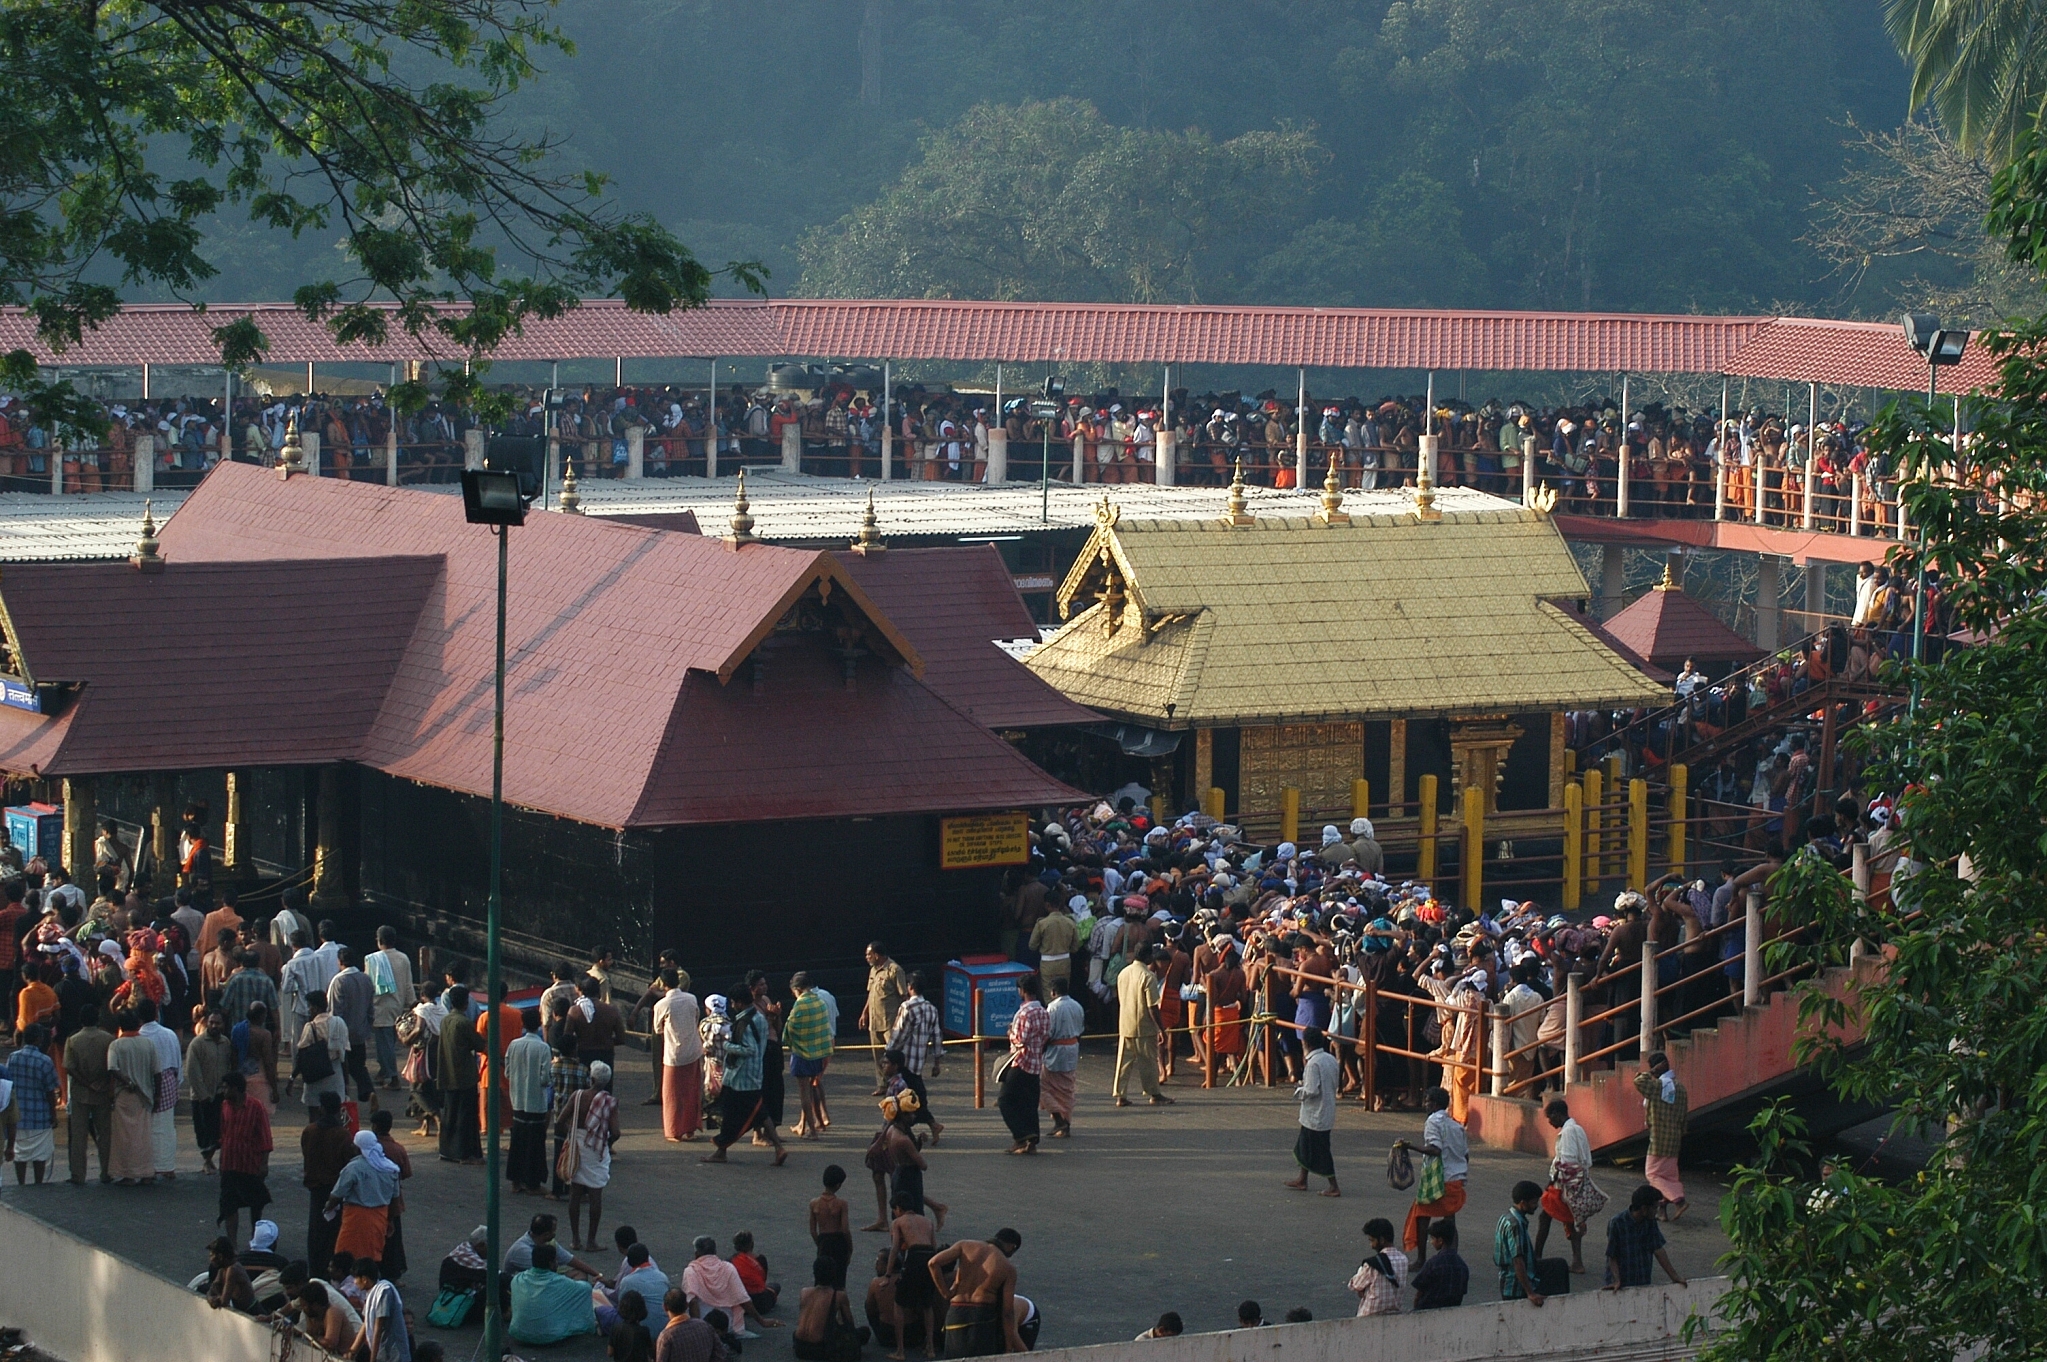 Devotees at the Sabarimala temple complex. (Photo by Shankar/The India Today Group/Getty Images)